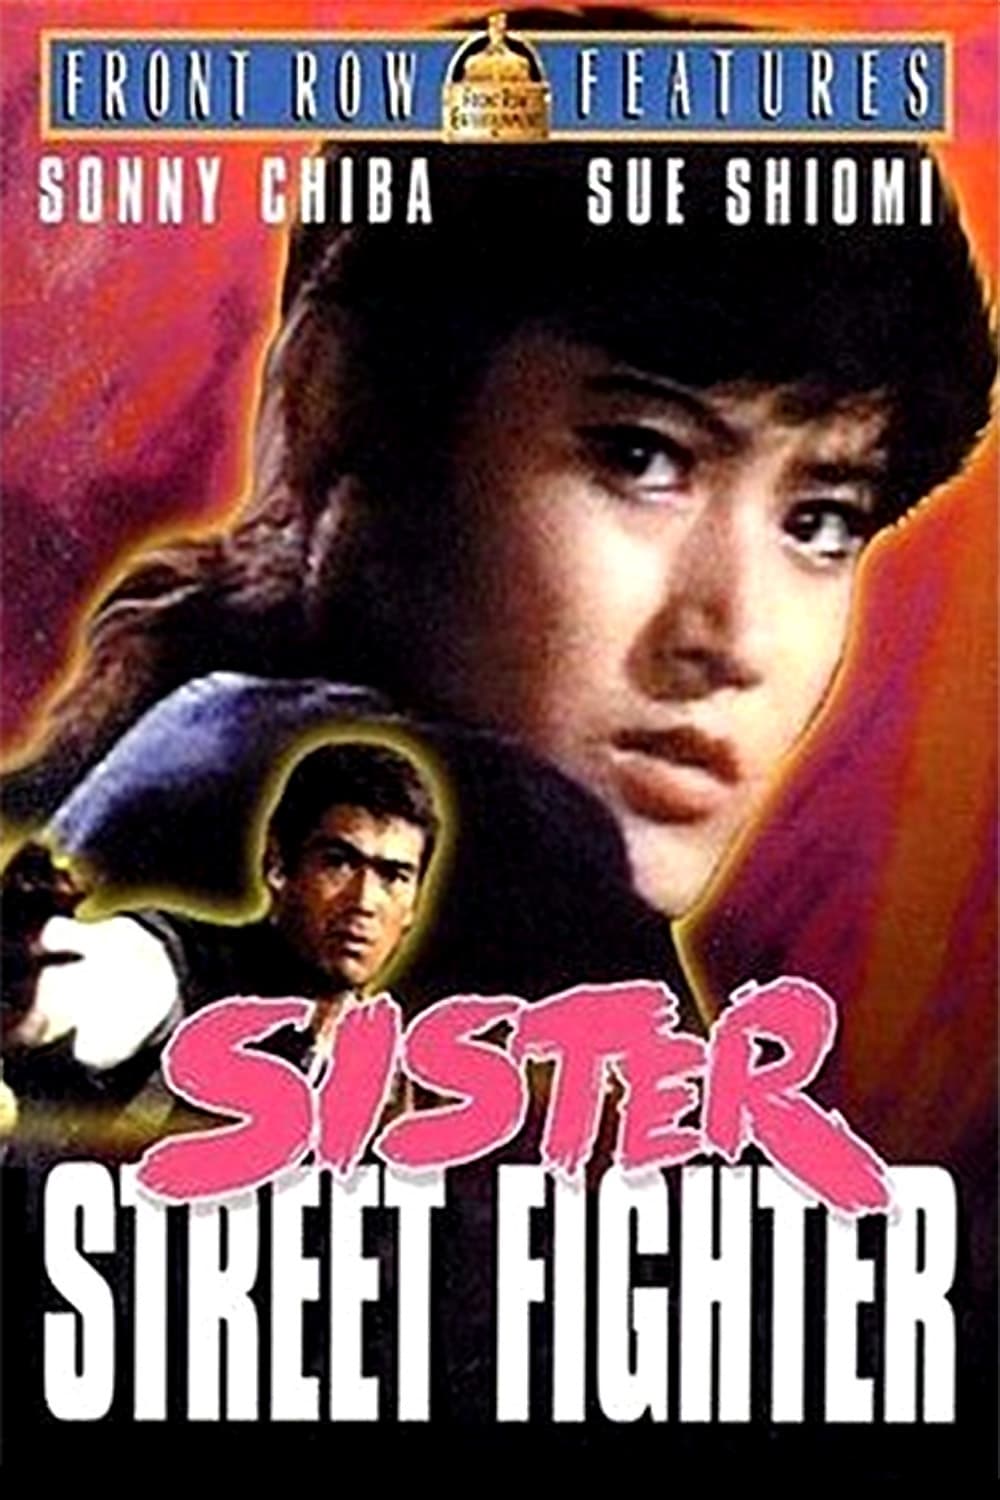 188603 Sister Street Fighter 1974 Movie Decor Wall POSTER Print Affiche